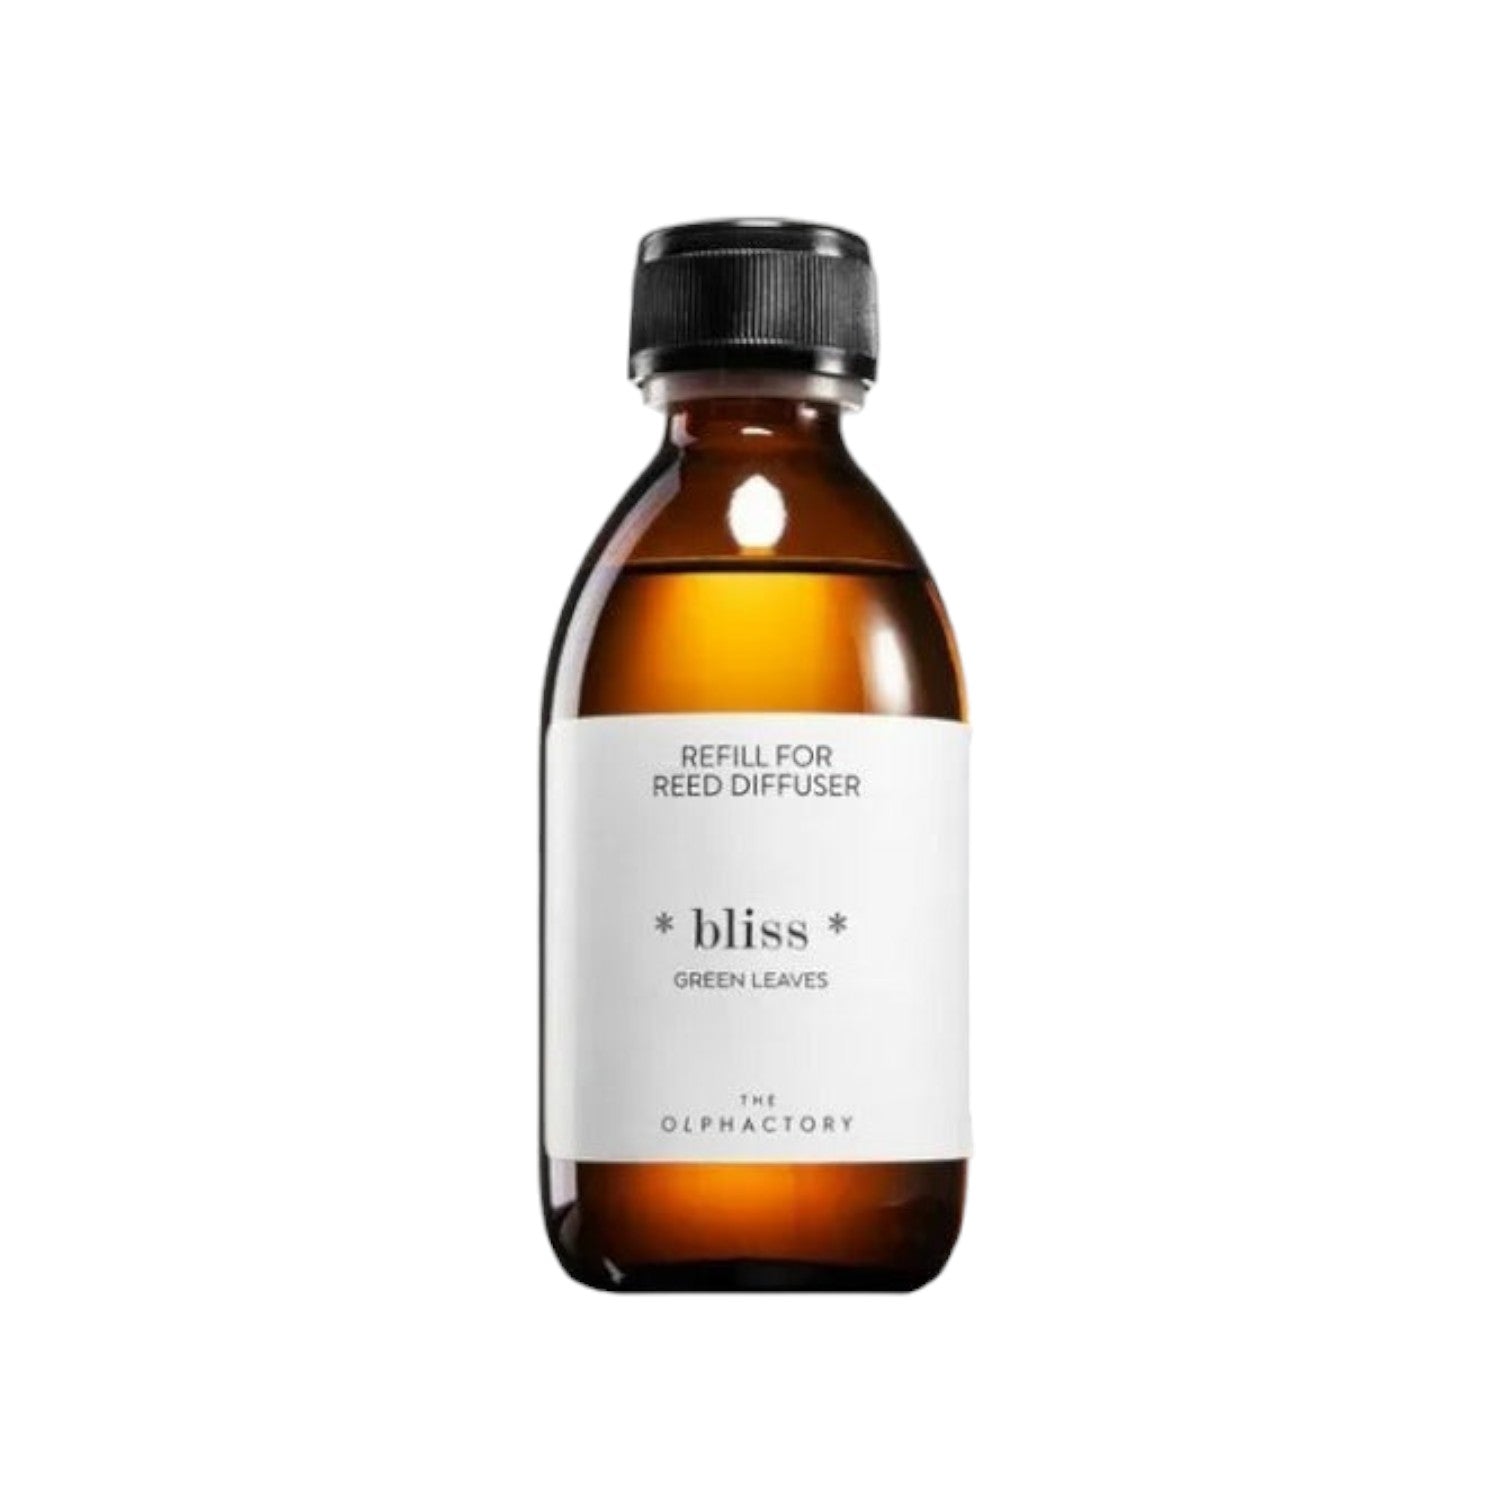 The Olphactory - Geurdiffuser refill 'Bliss' - 250ml